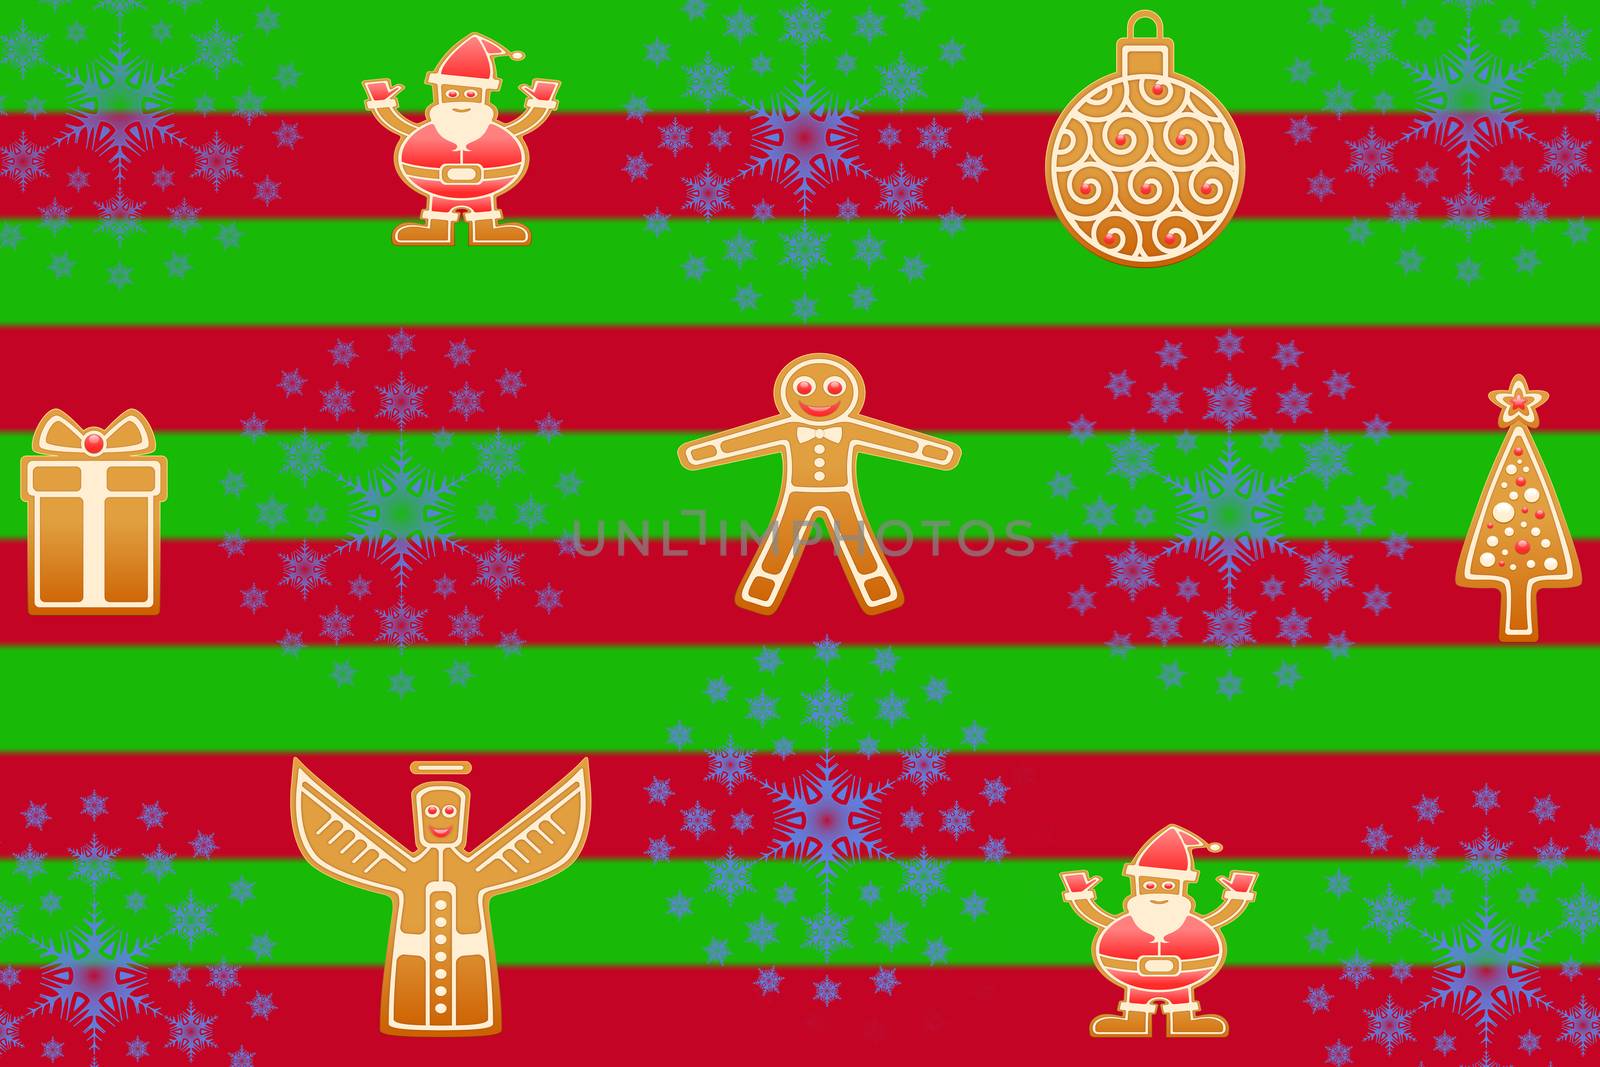 Christmas red and green striped background with gingerbread cookies in different shapes and snowflake stars great for santa claus present wrapping paper or background